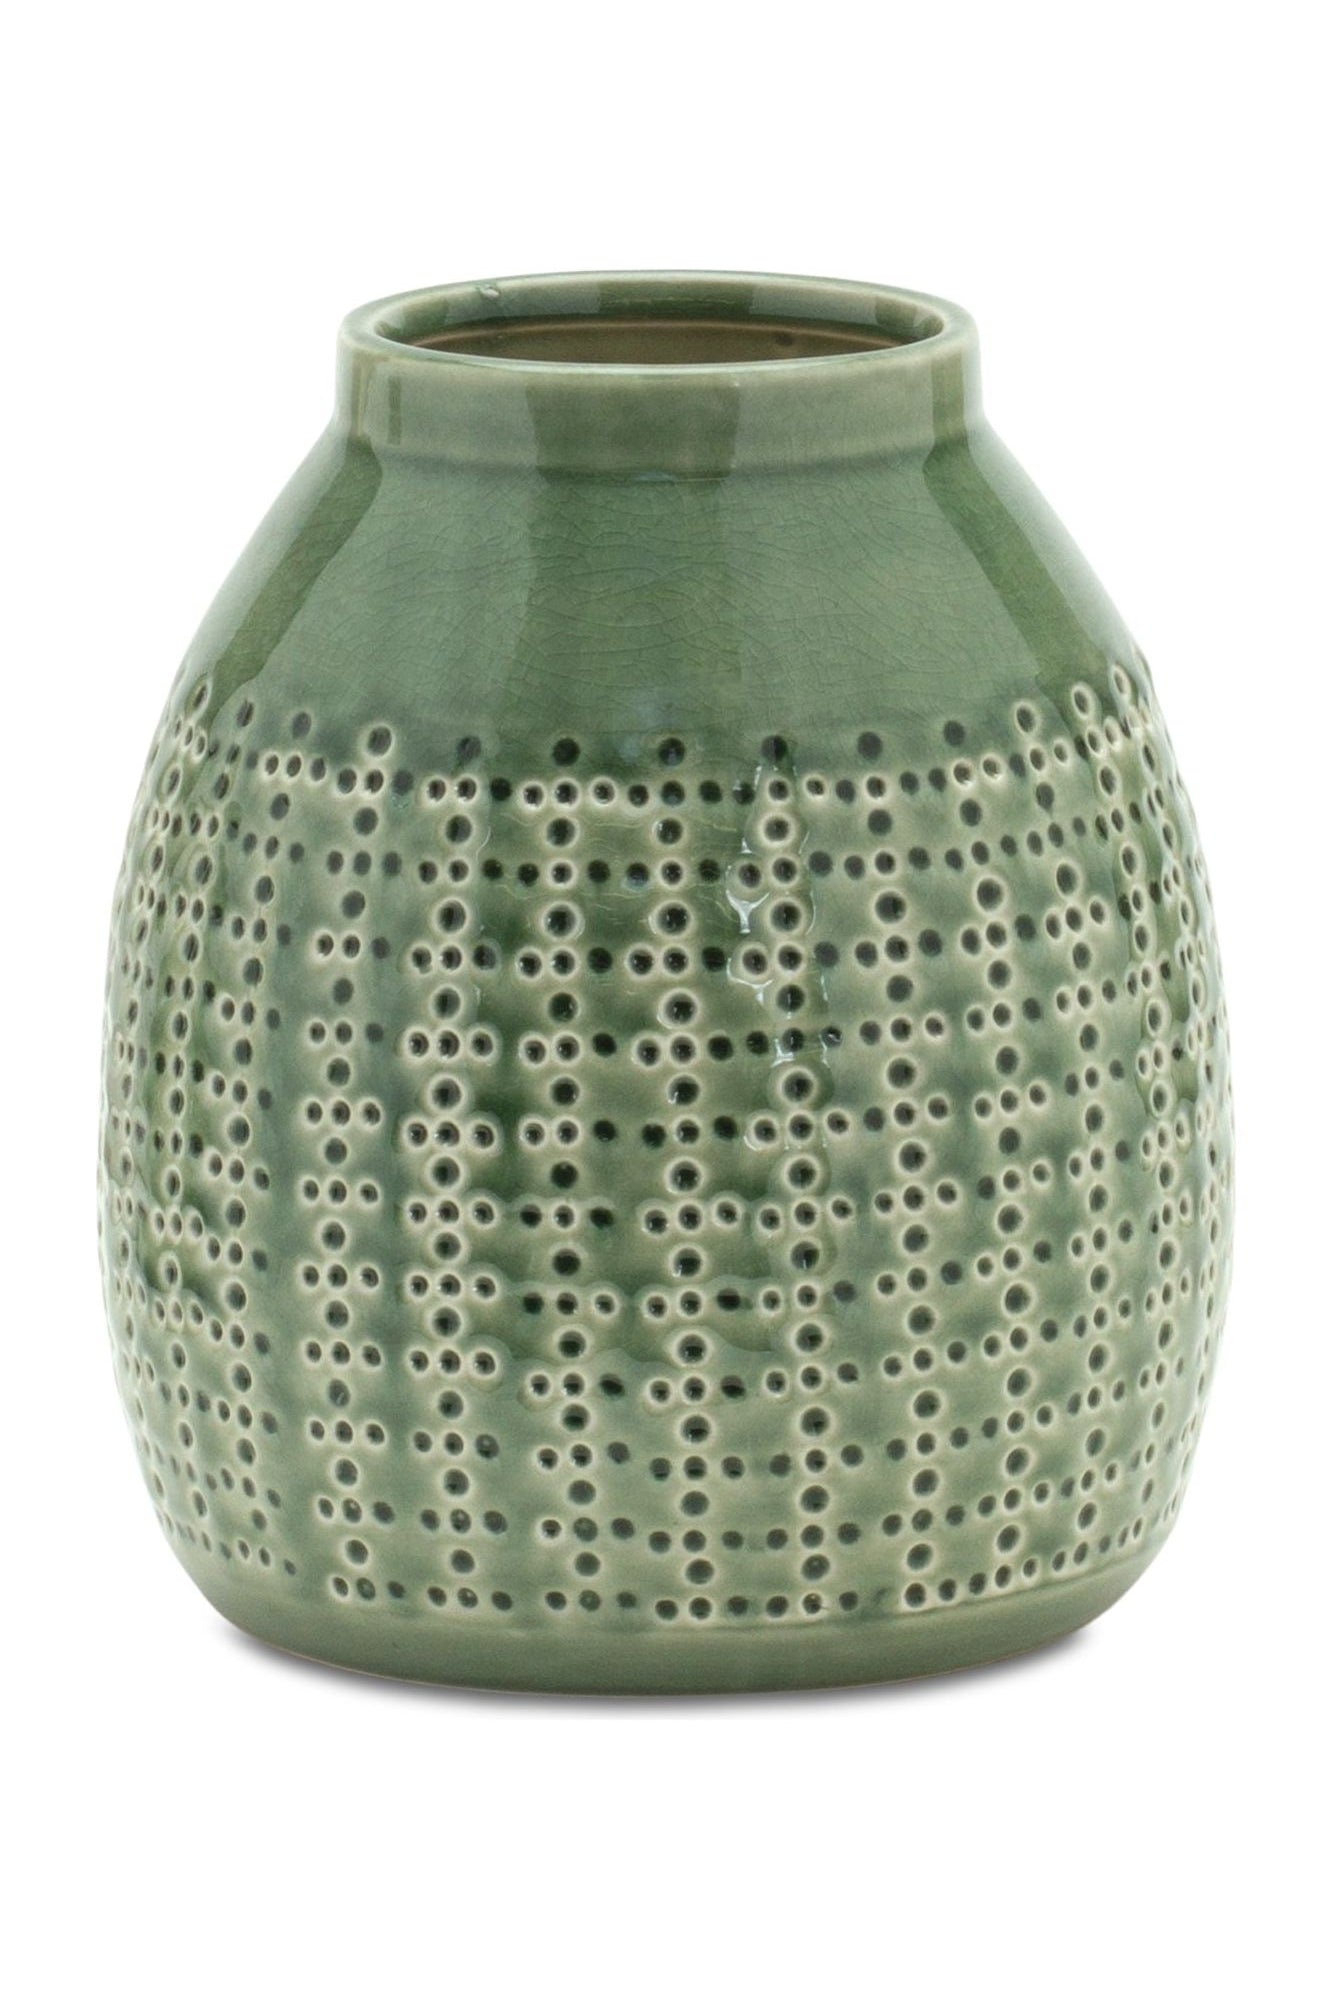 Shop For 8"H Green Terra Cotta Container 85241